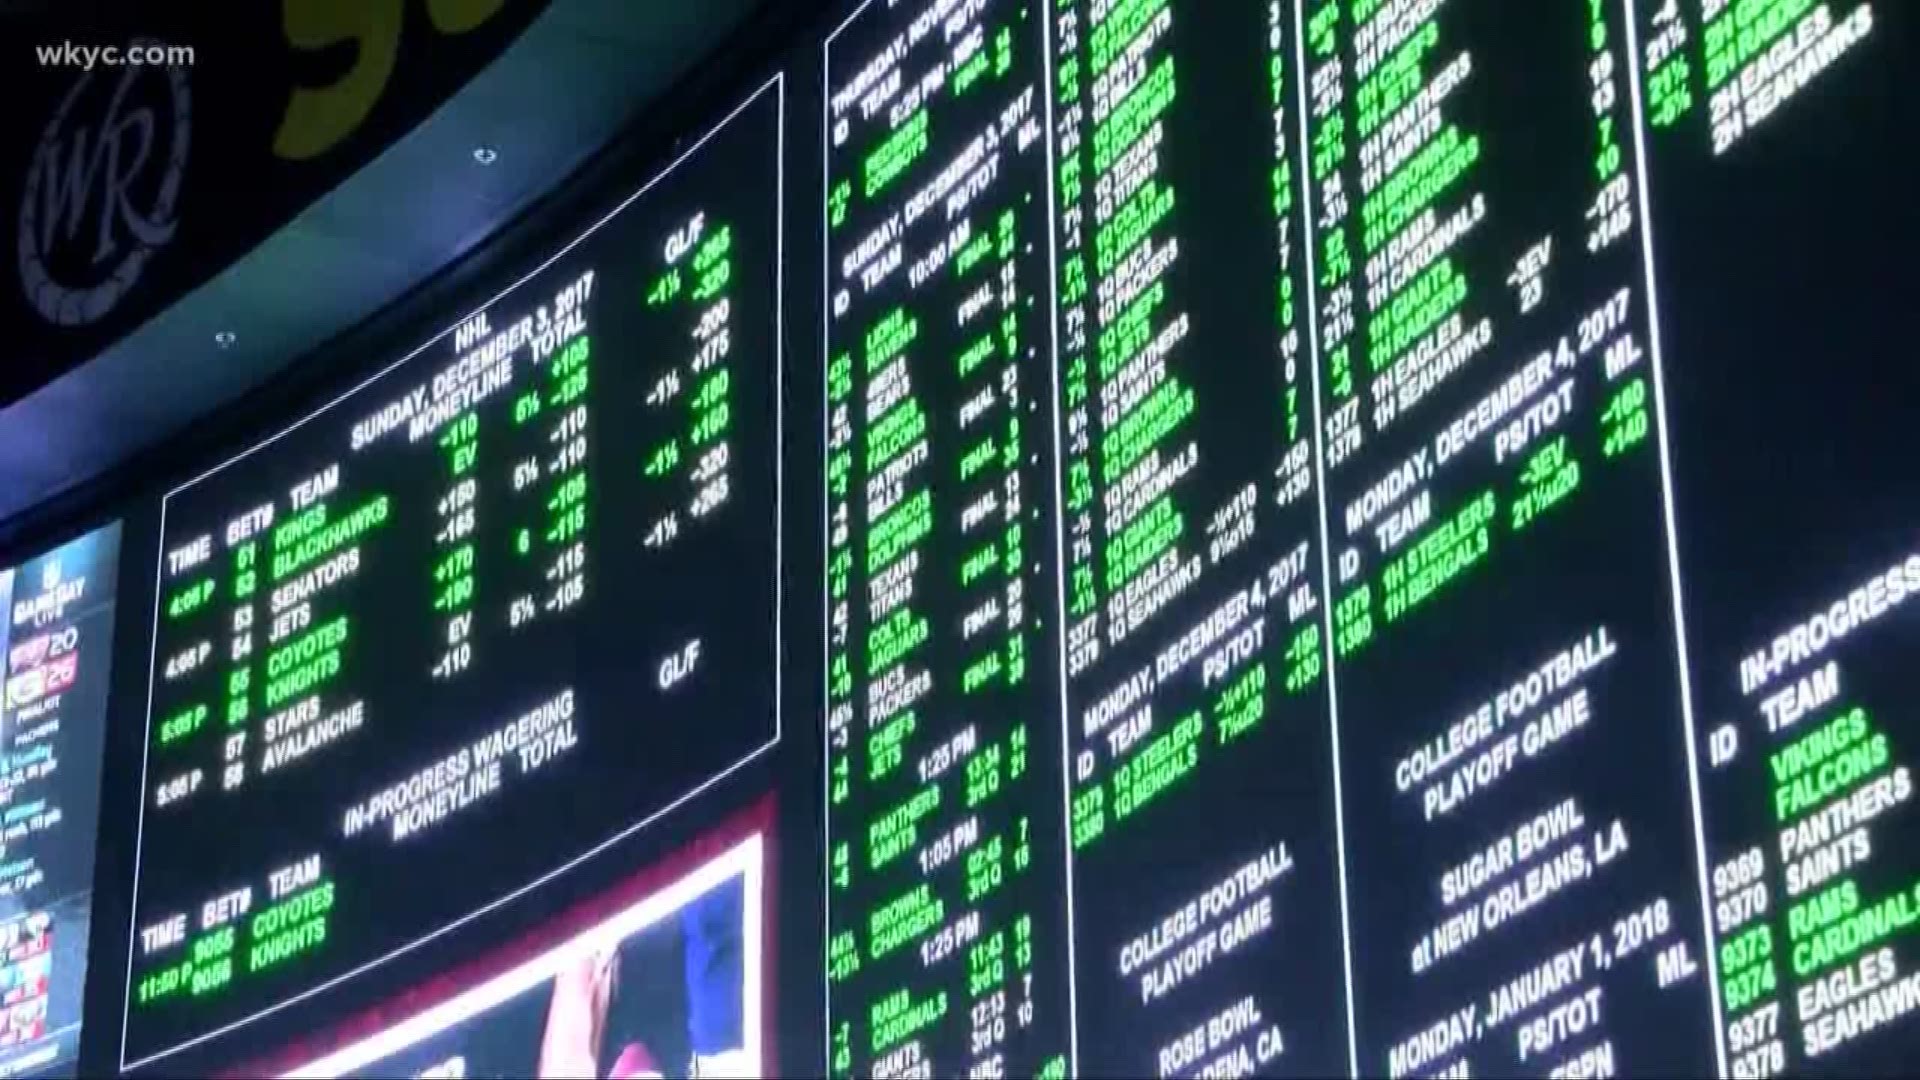 Bill to make sports gambling legal introduced